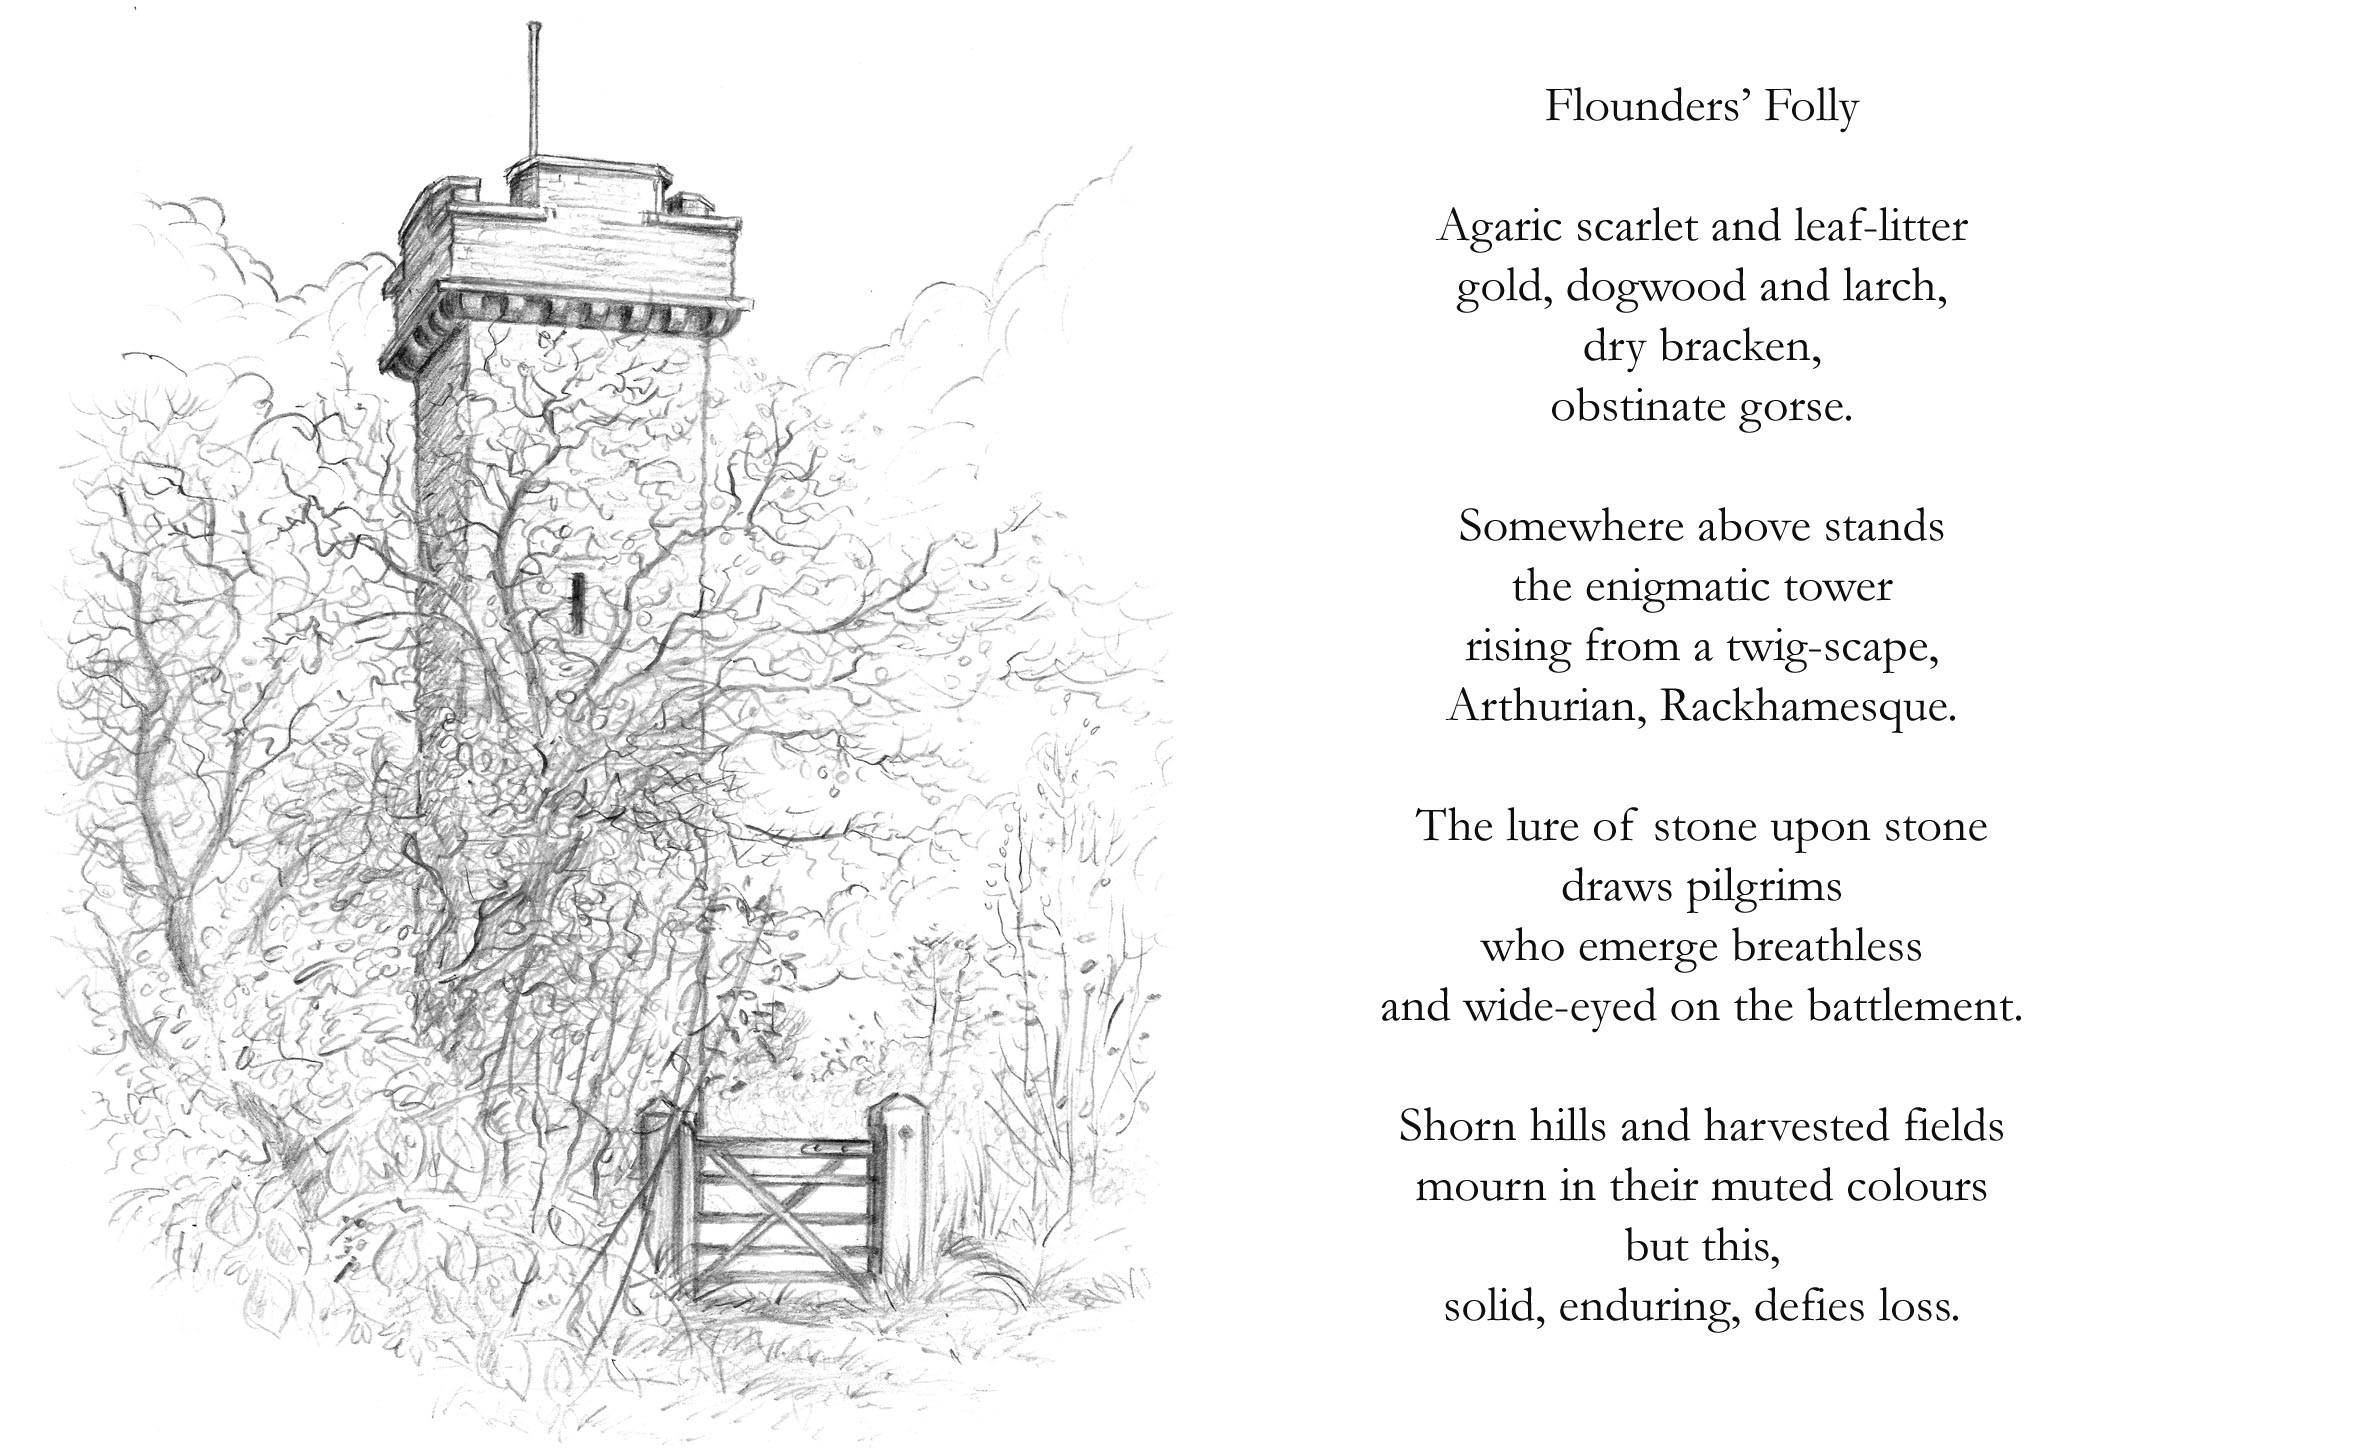 Flounders'Folly tower in autumn with the accompanying poem as part of the artwork